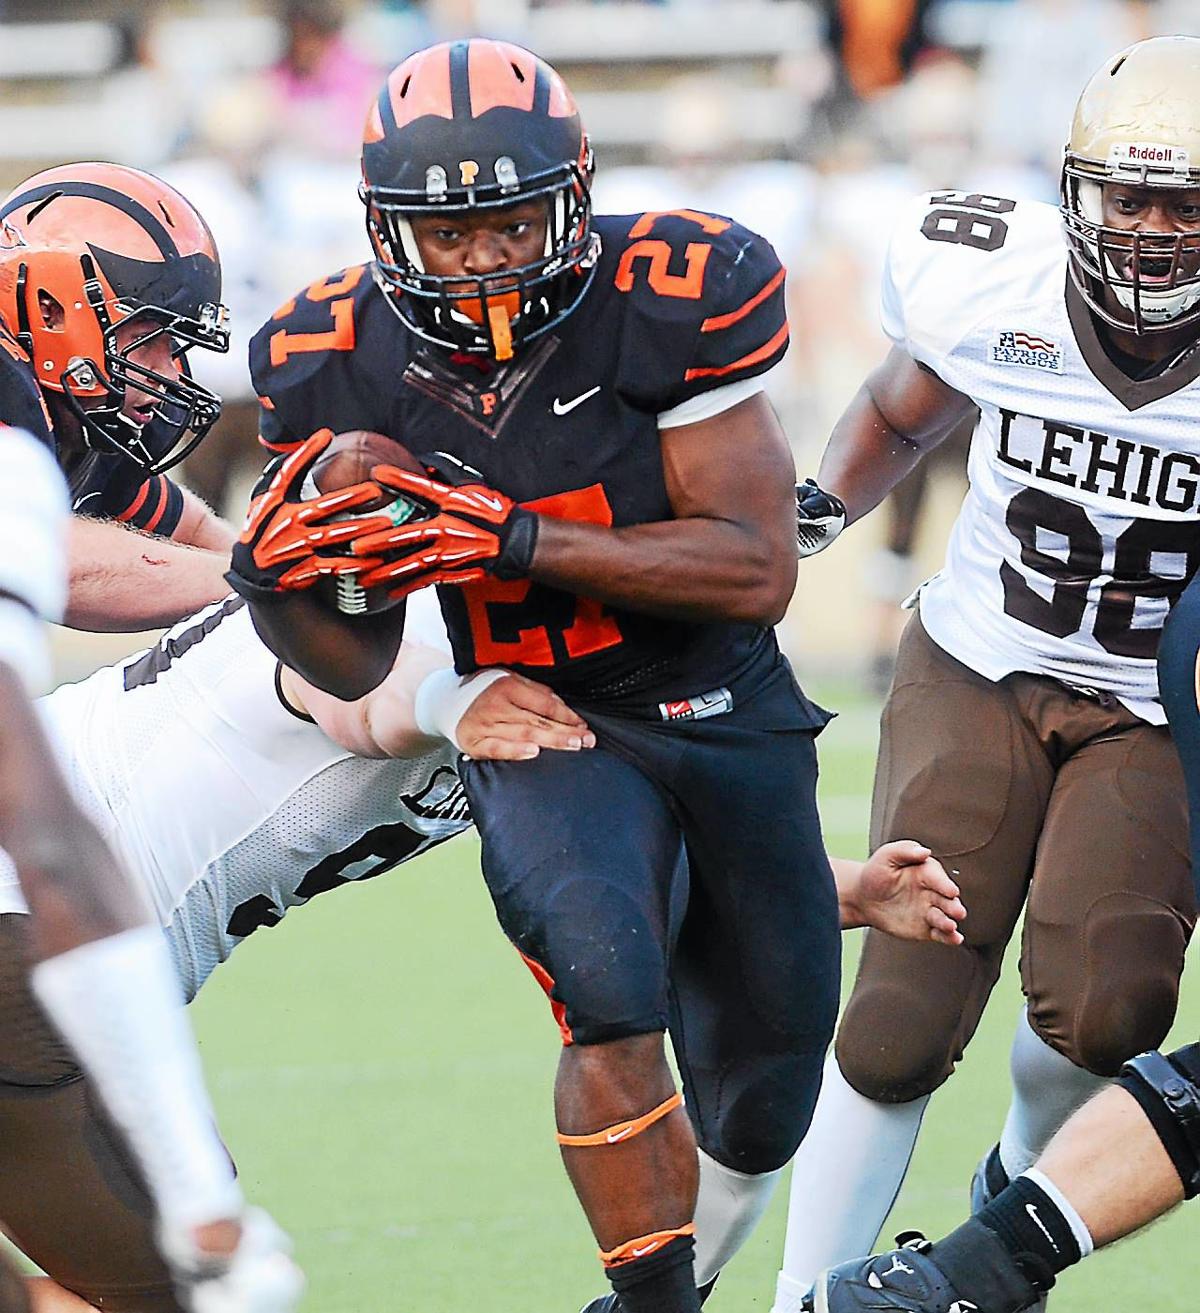 Lehigh And Princeton Football Engage This Saturday In Final Test Before League Play